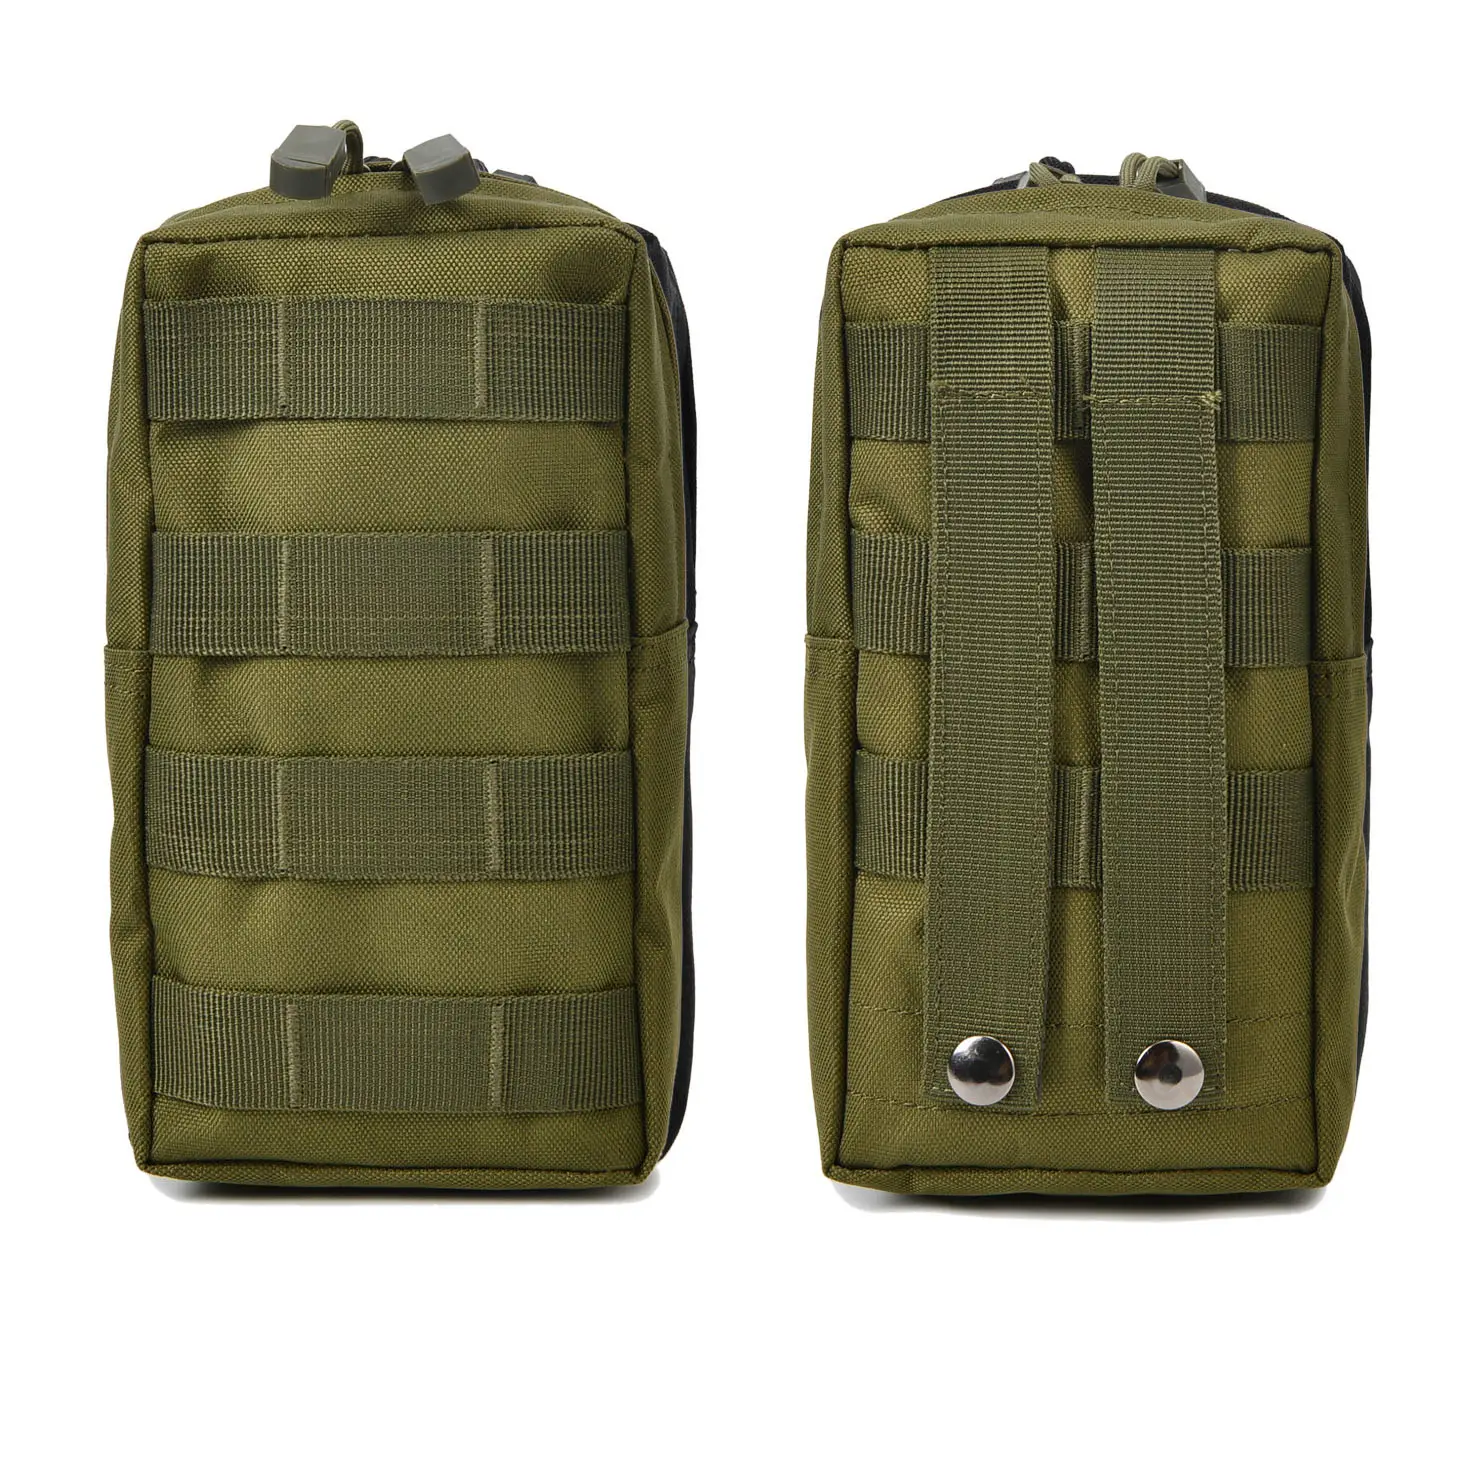 Outdoor Emergency EDC Hunting Tactical molle pouch bags Waist tactical waist pouch